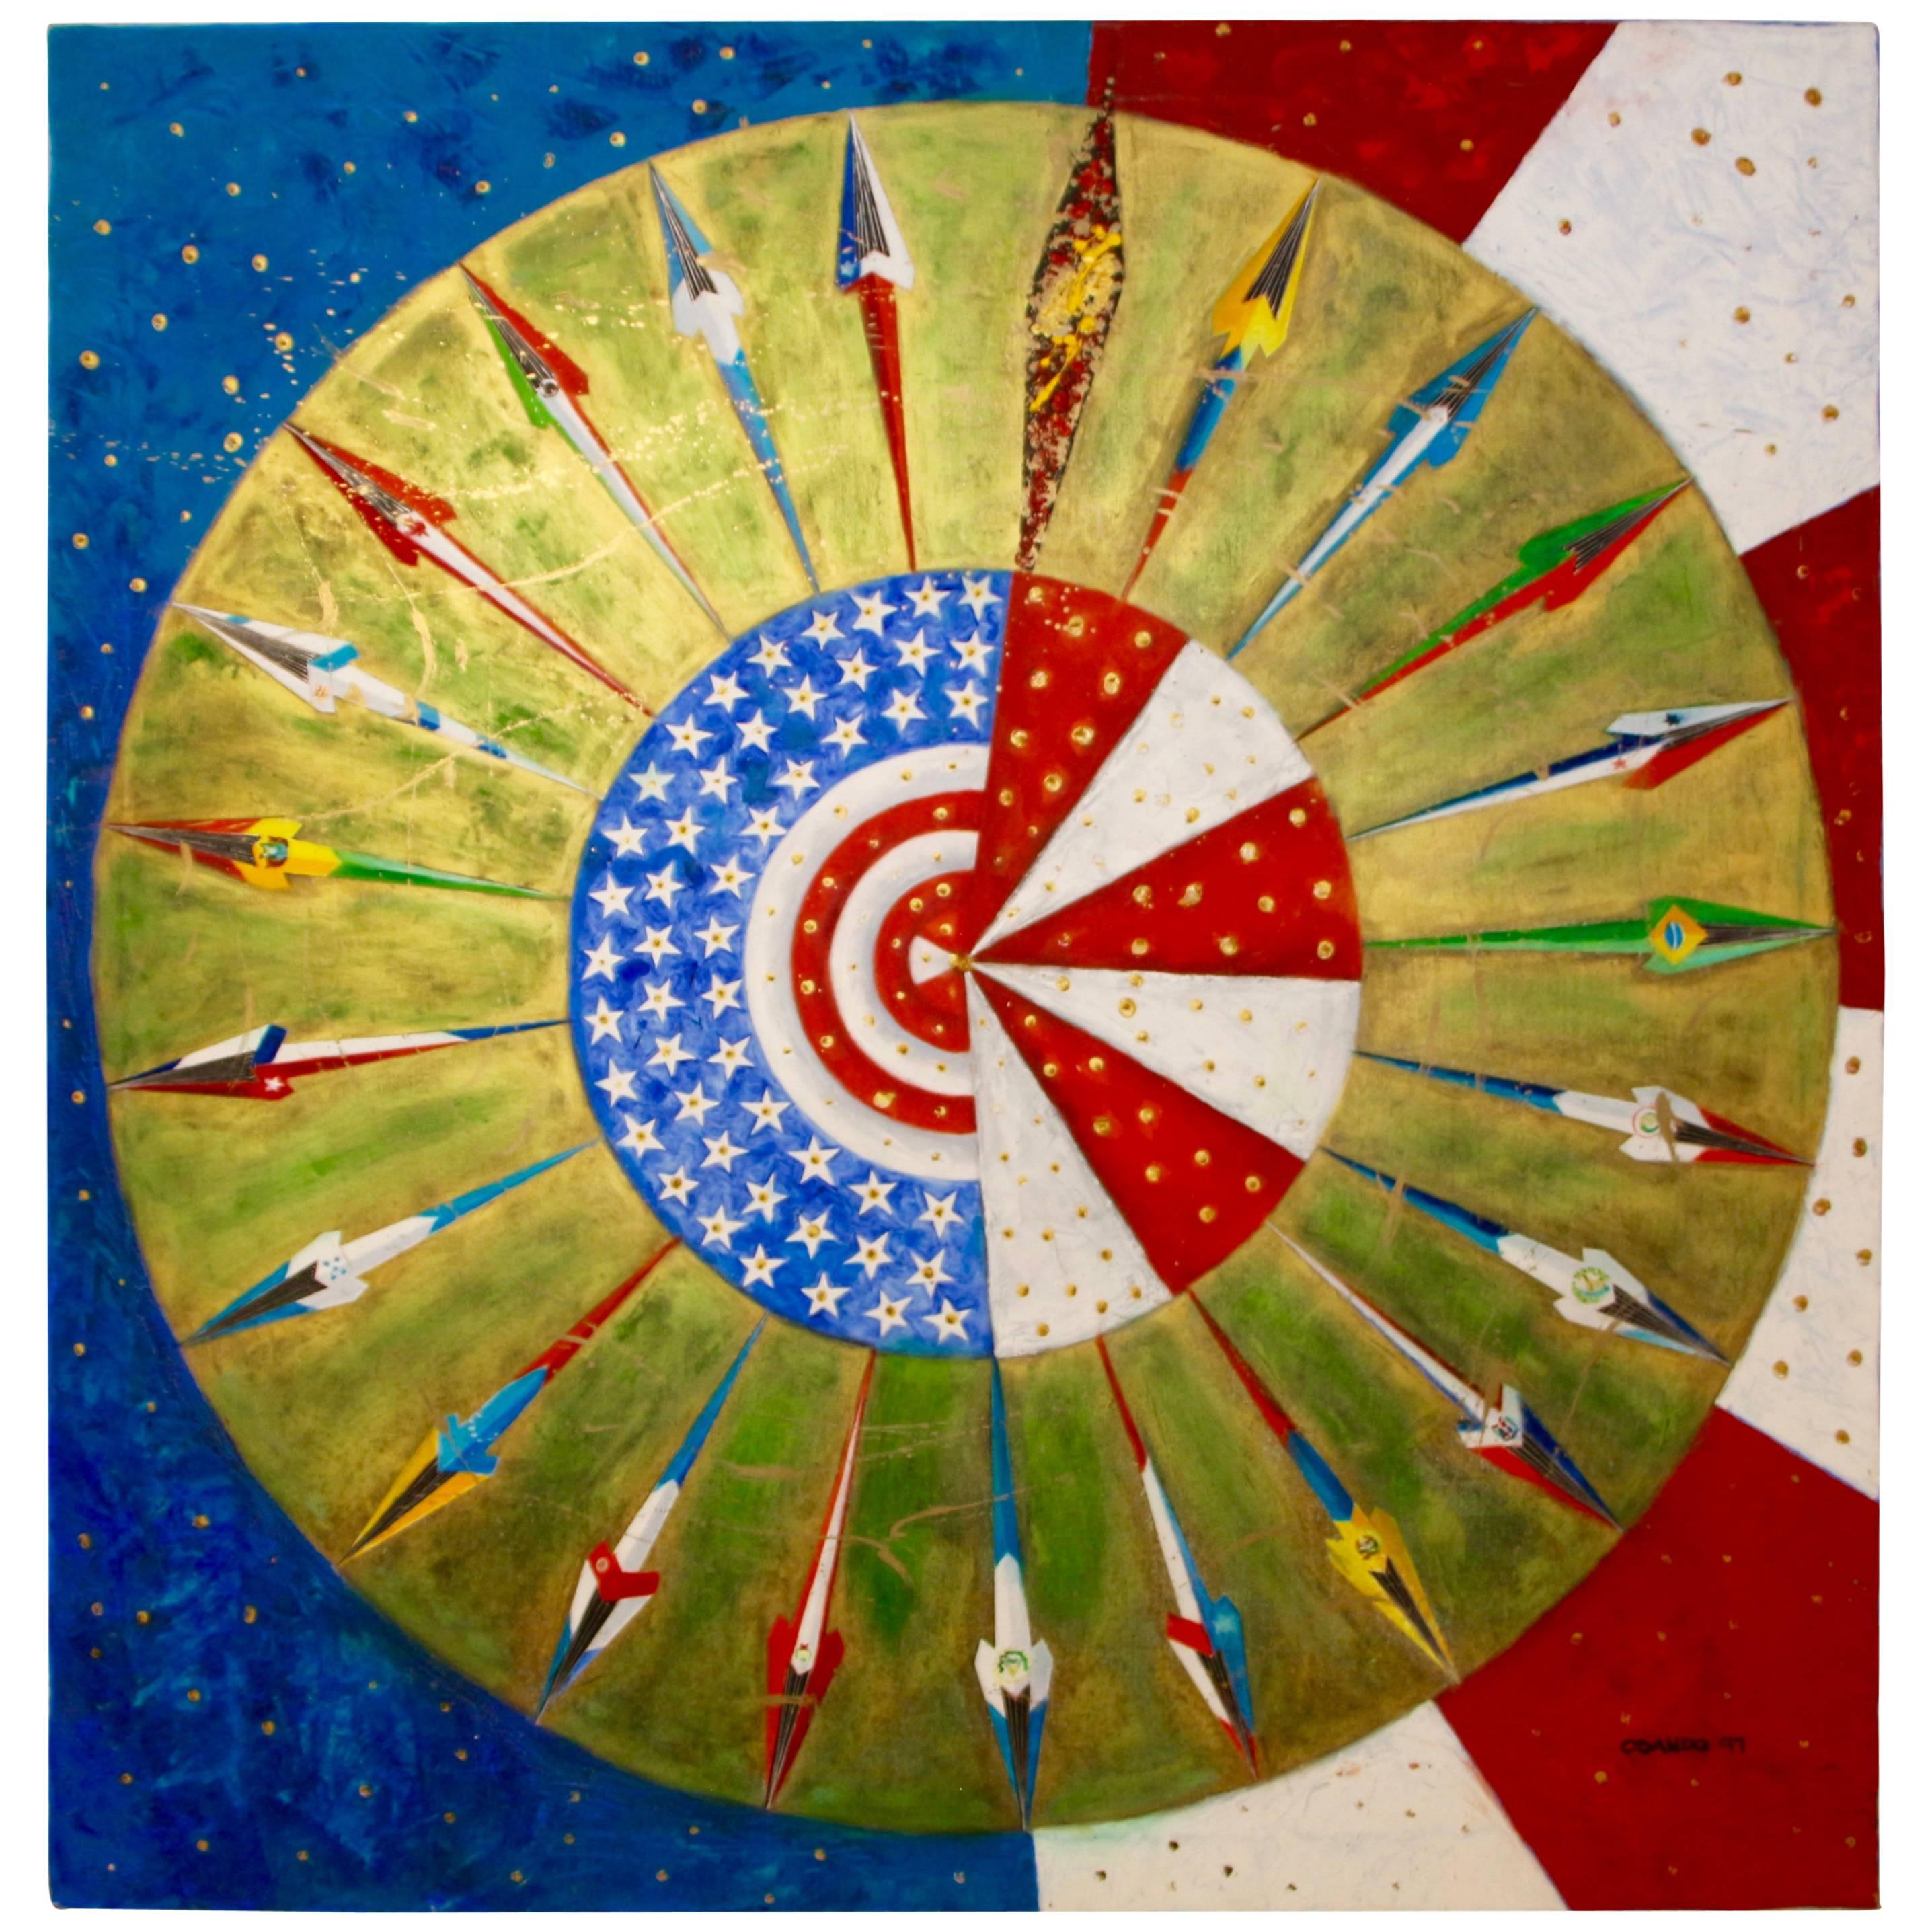 Vibrant Abstract by George Obando, "Unity and the Americas", 1997